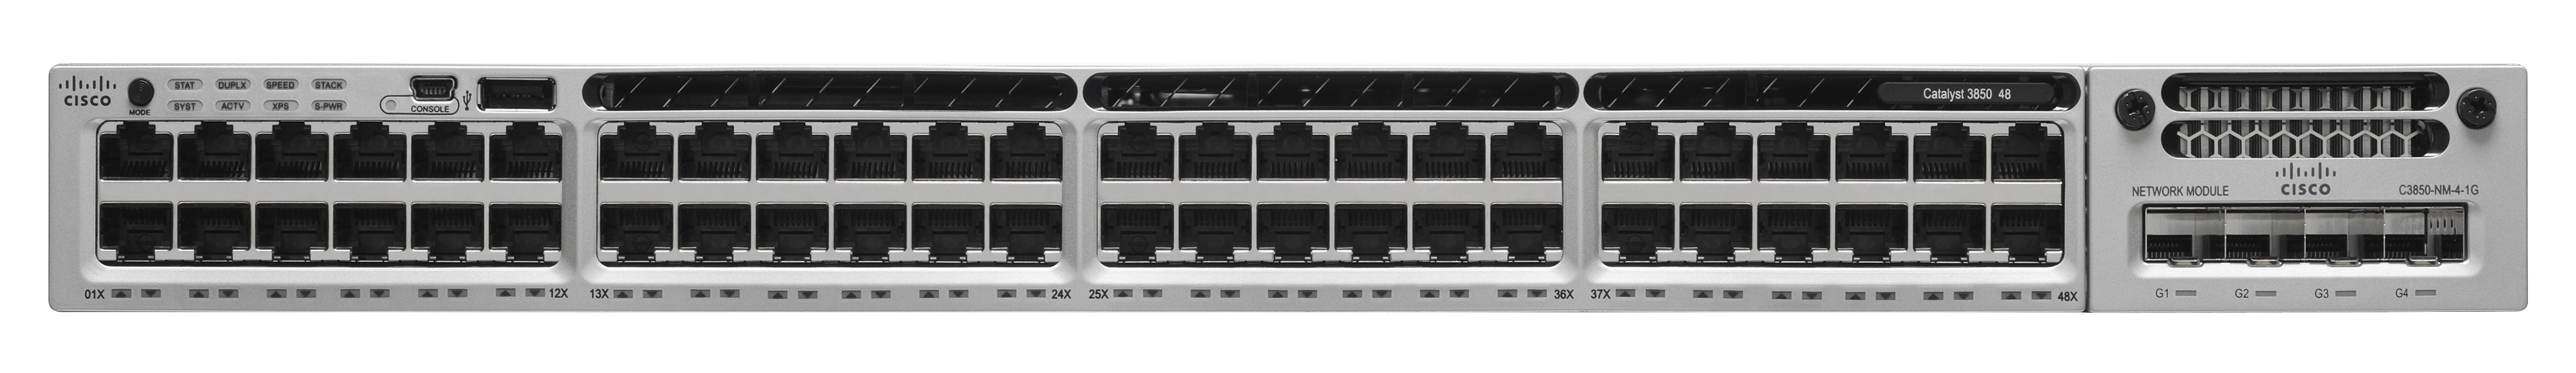 Cisco Catalyst WS-C3850-48F-L network switch Managed Power over Ethernet (PoE) Black, Grey